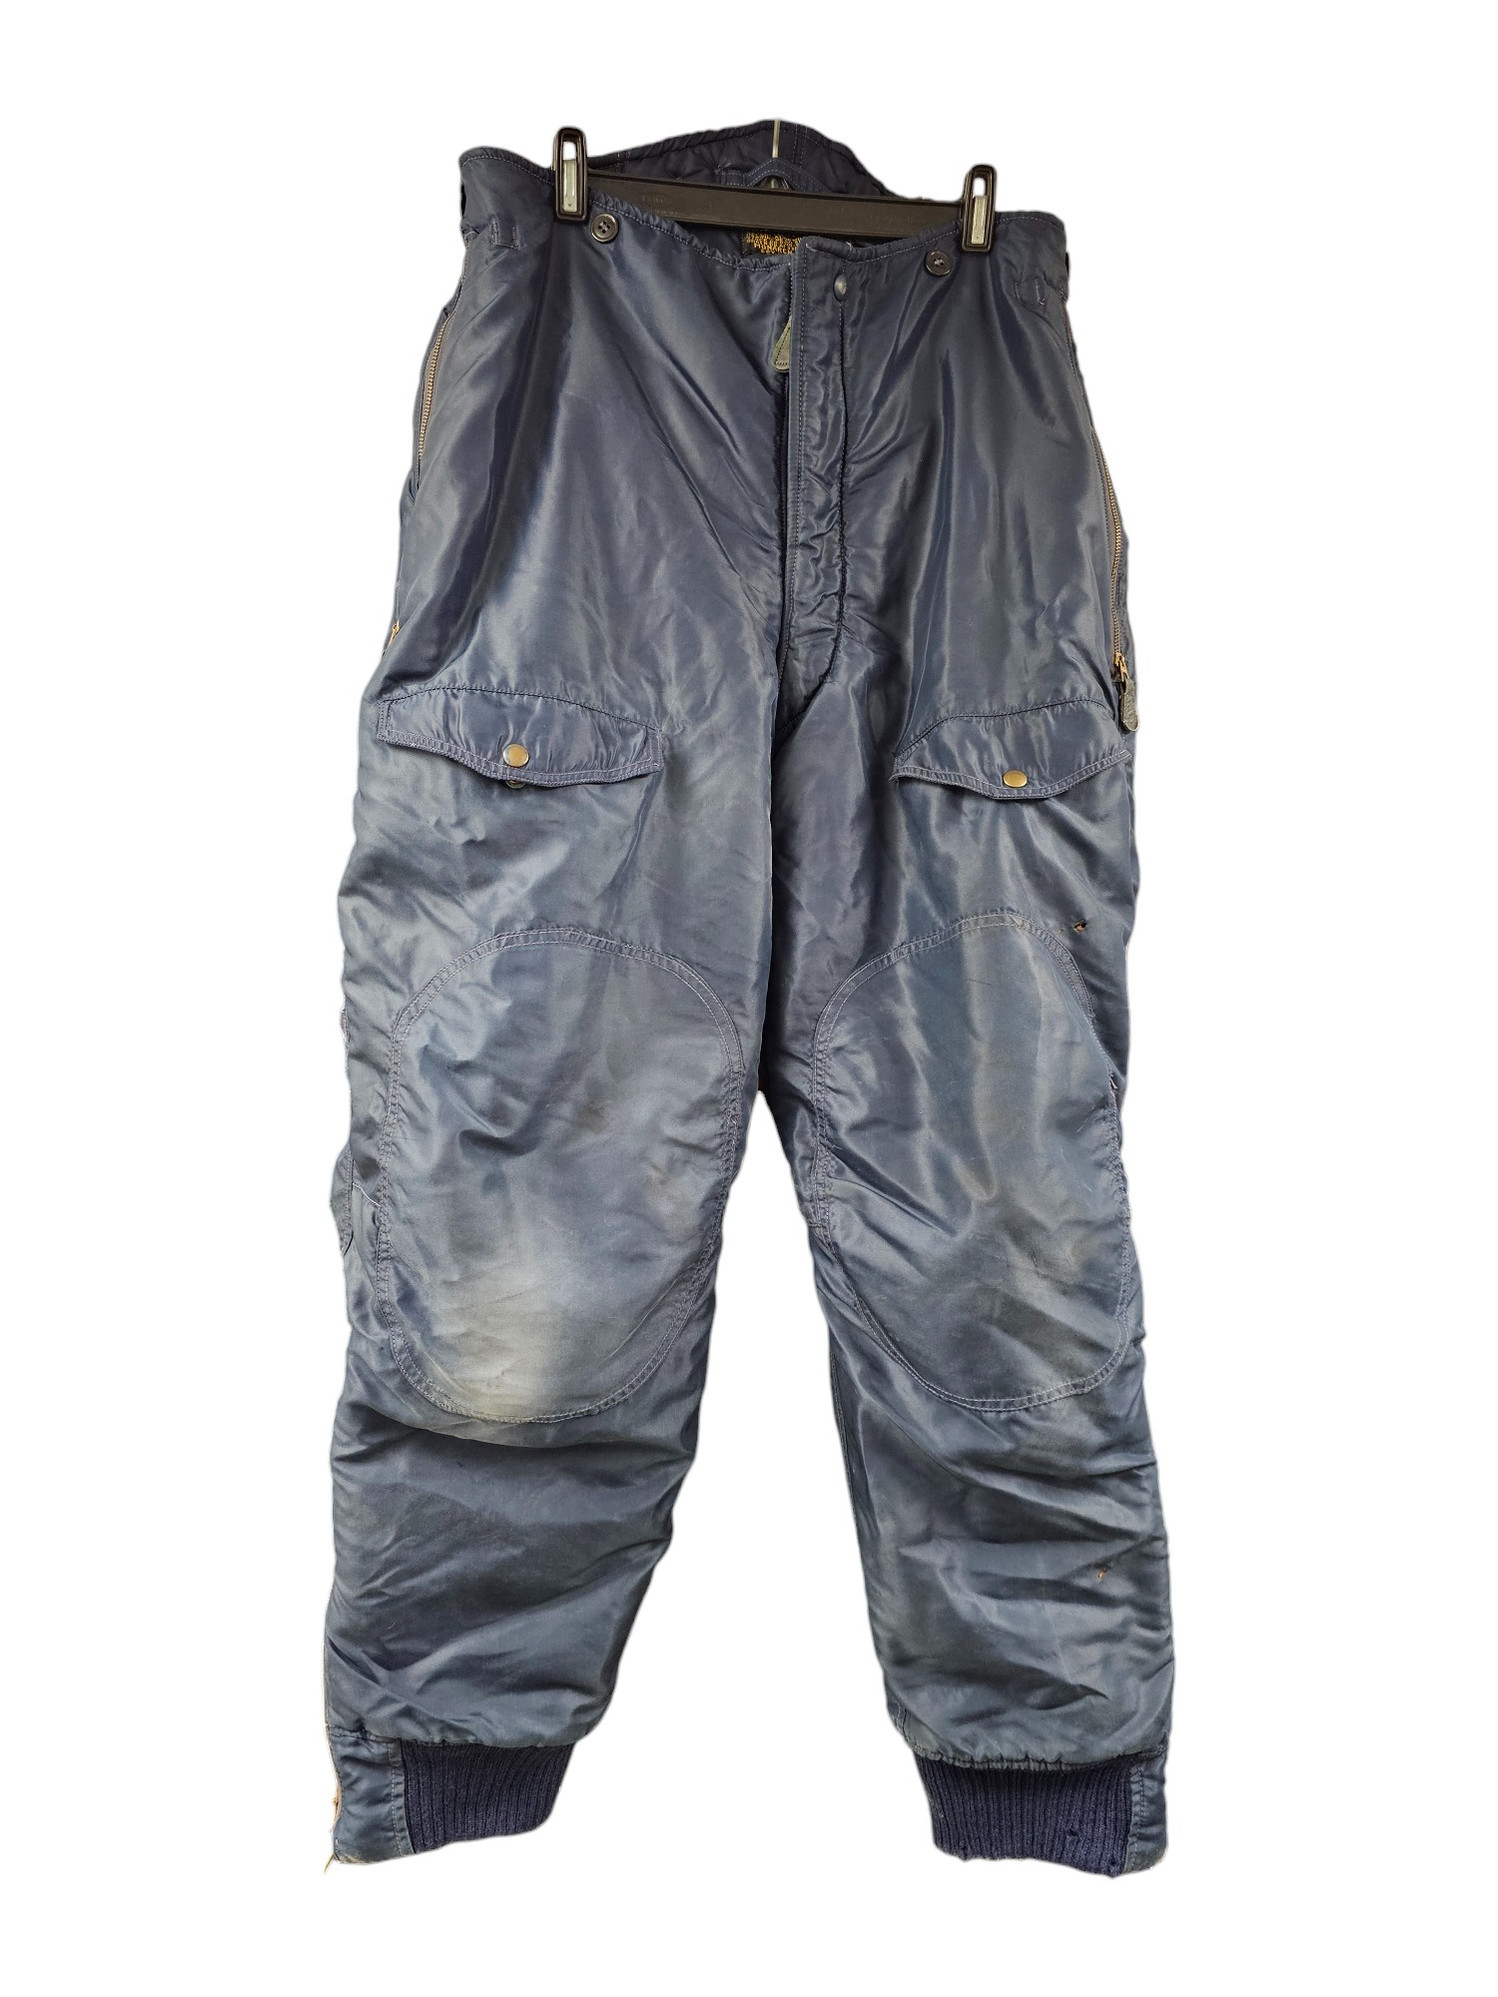 U.S. Armed Forces Air Crew Monarch F-1A Heavy Pants